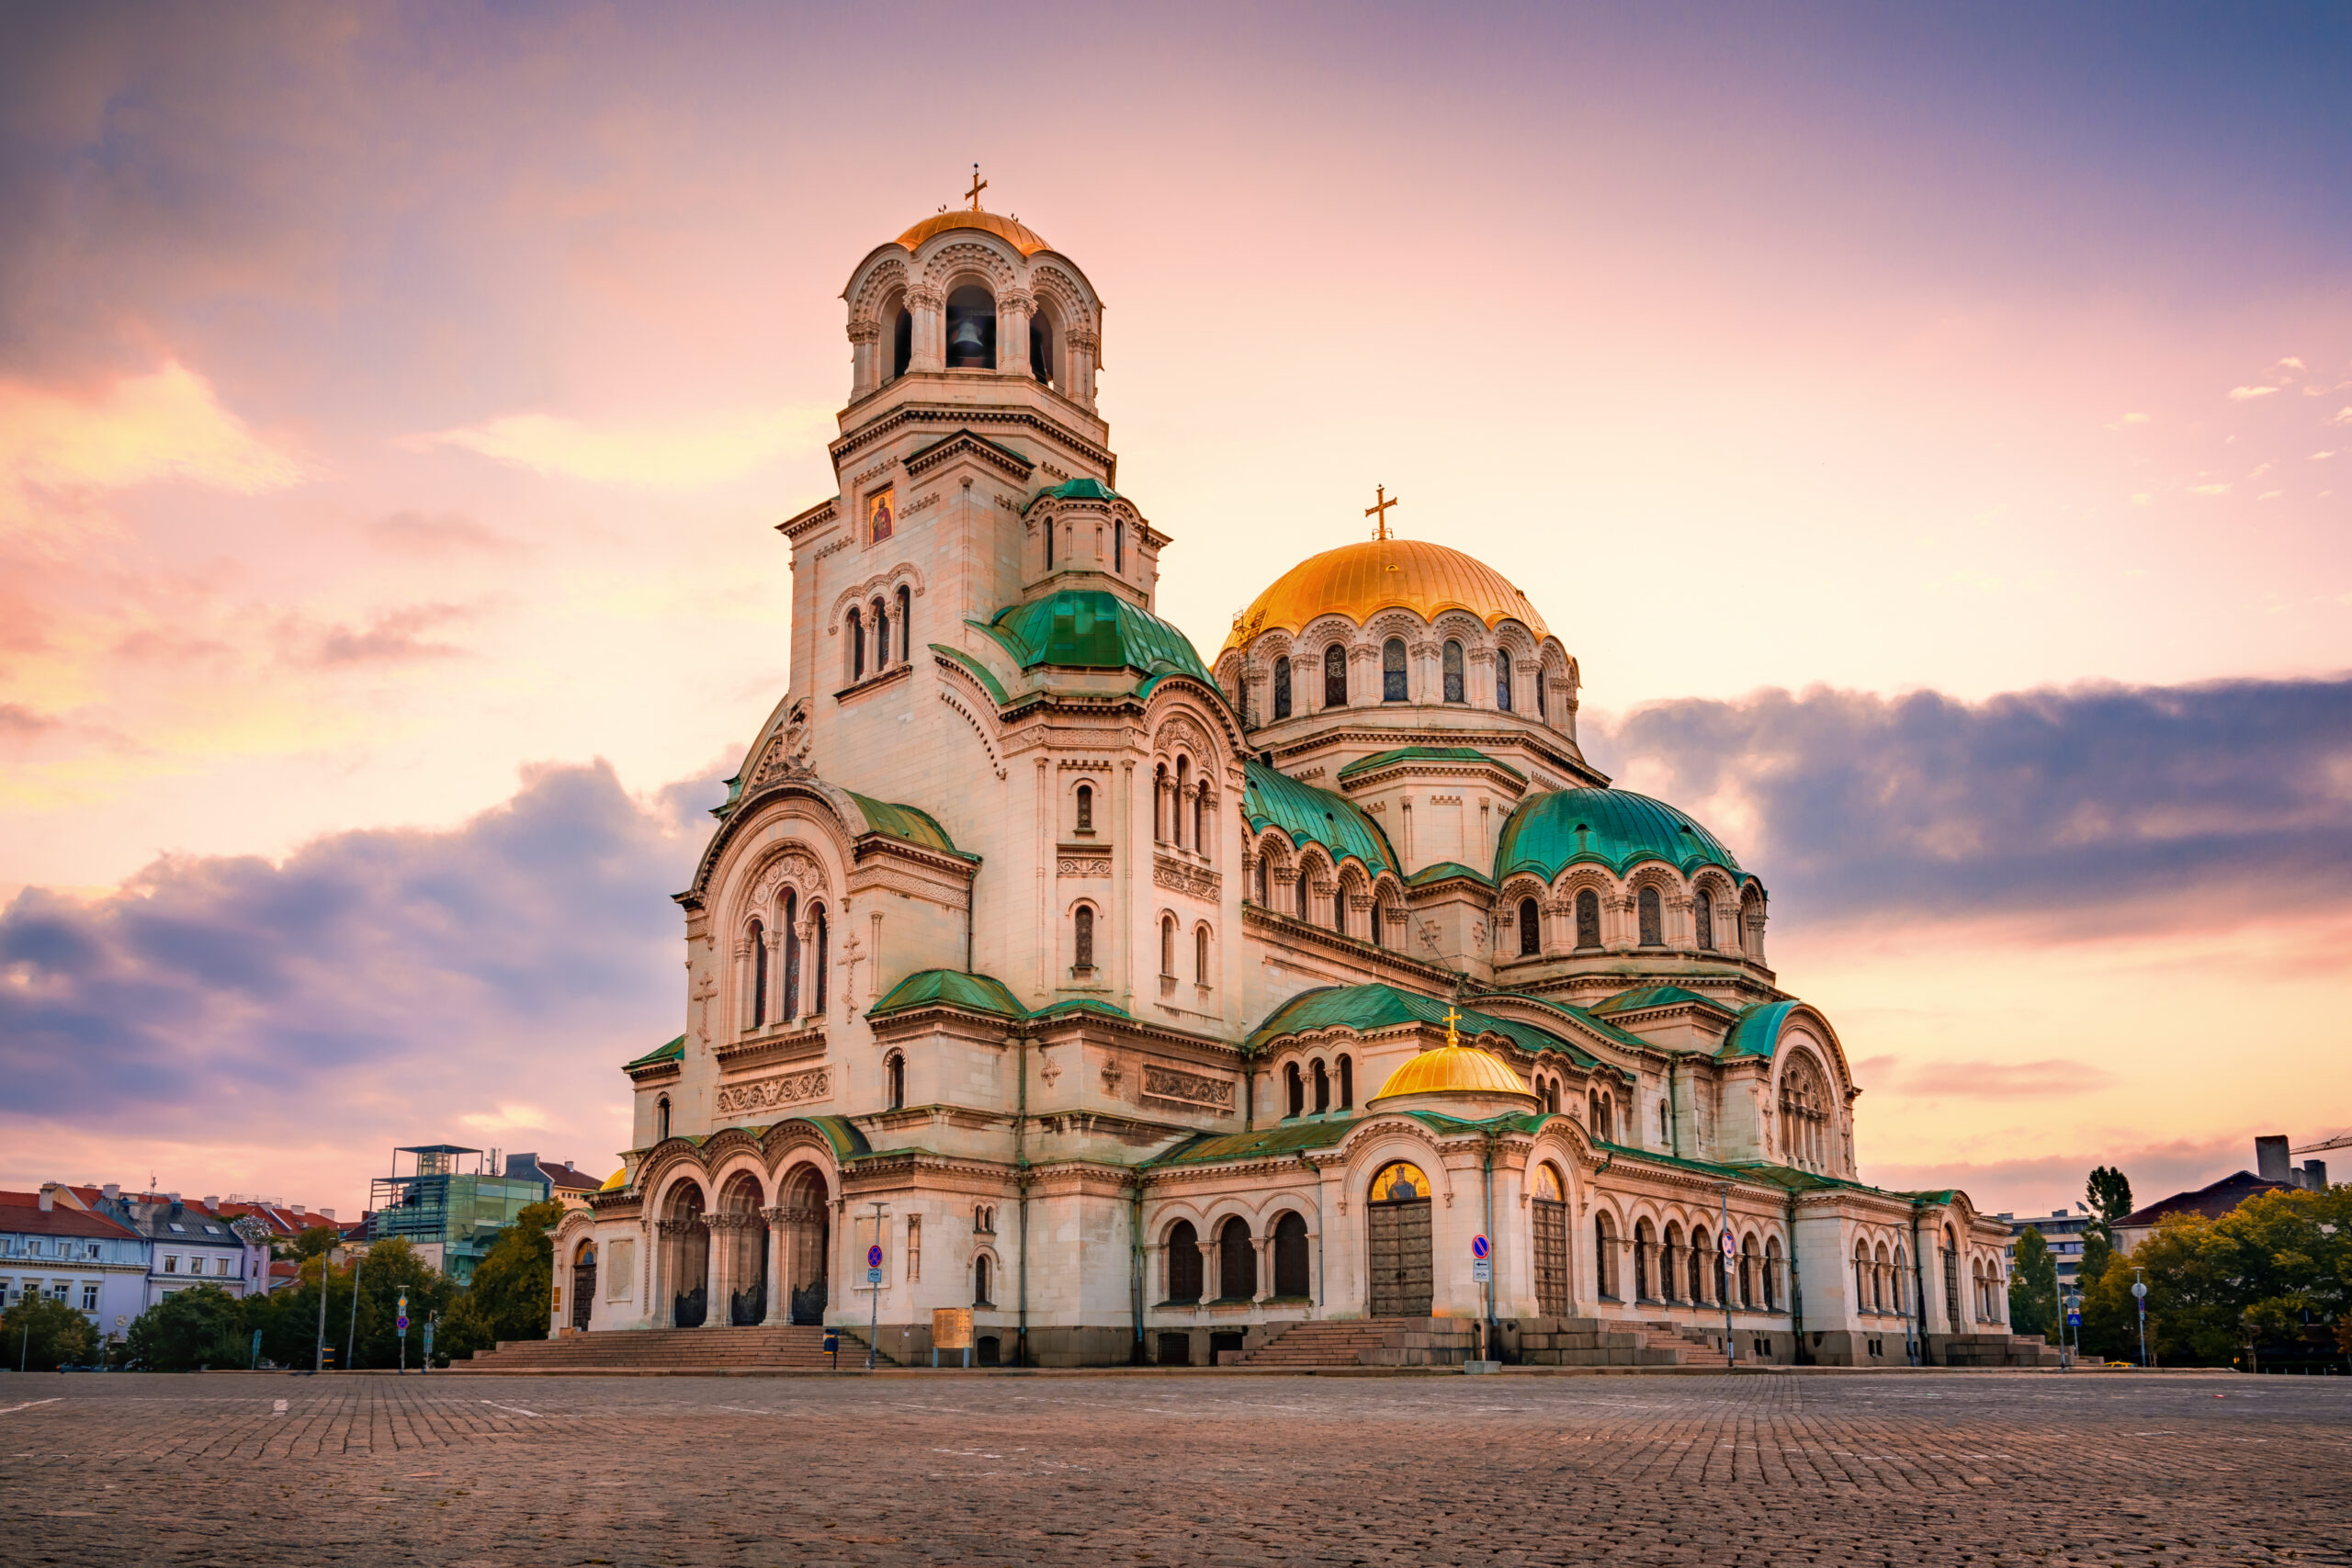 Cathedral in Bulgaria with golden domes on a square.